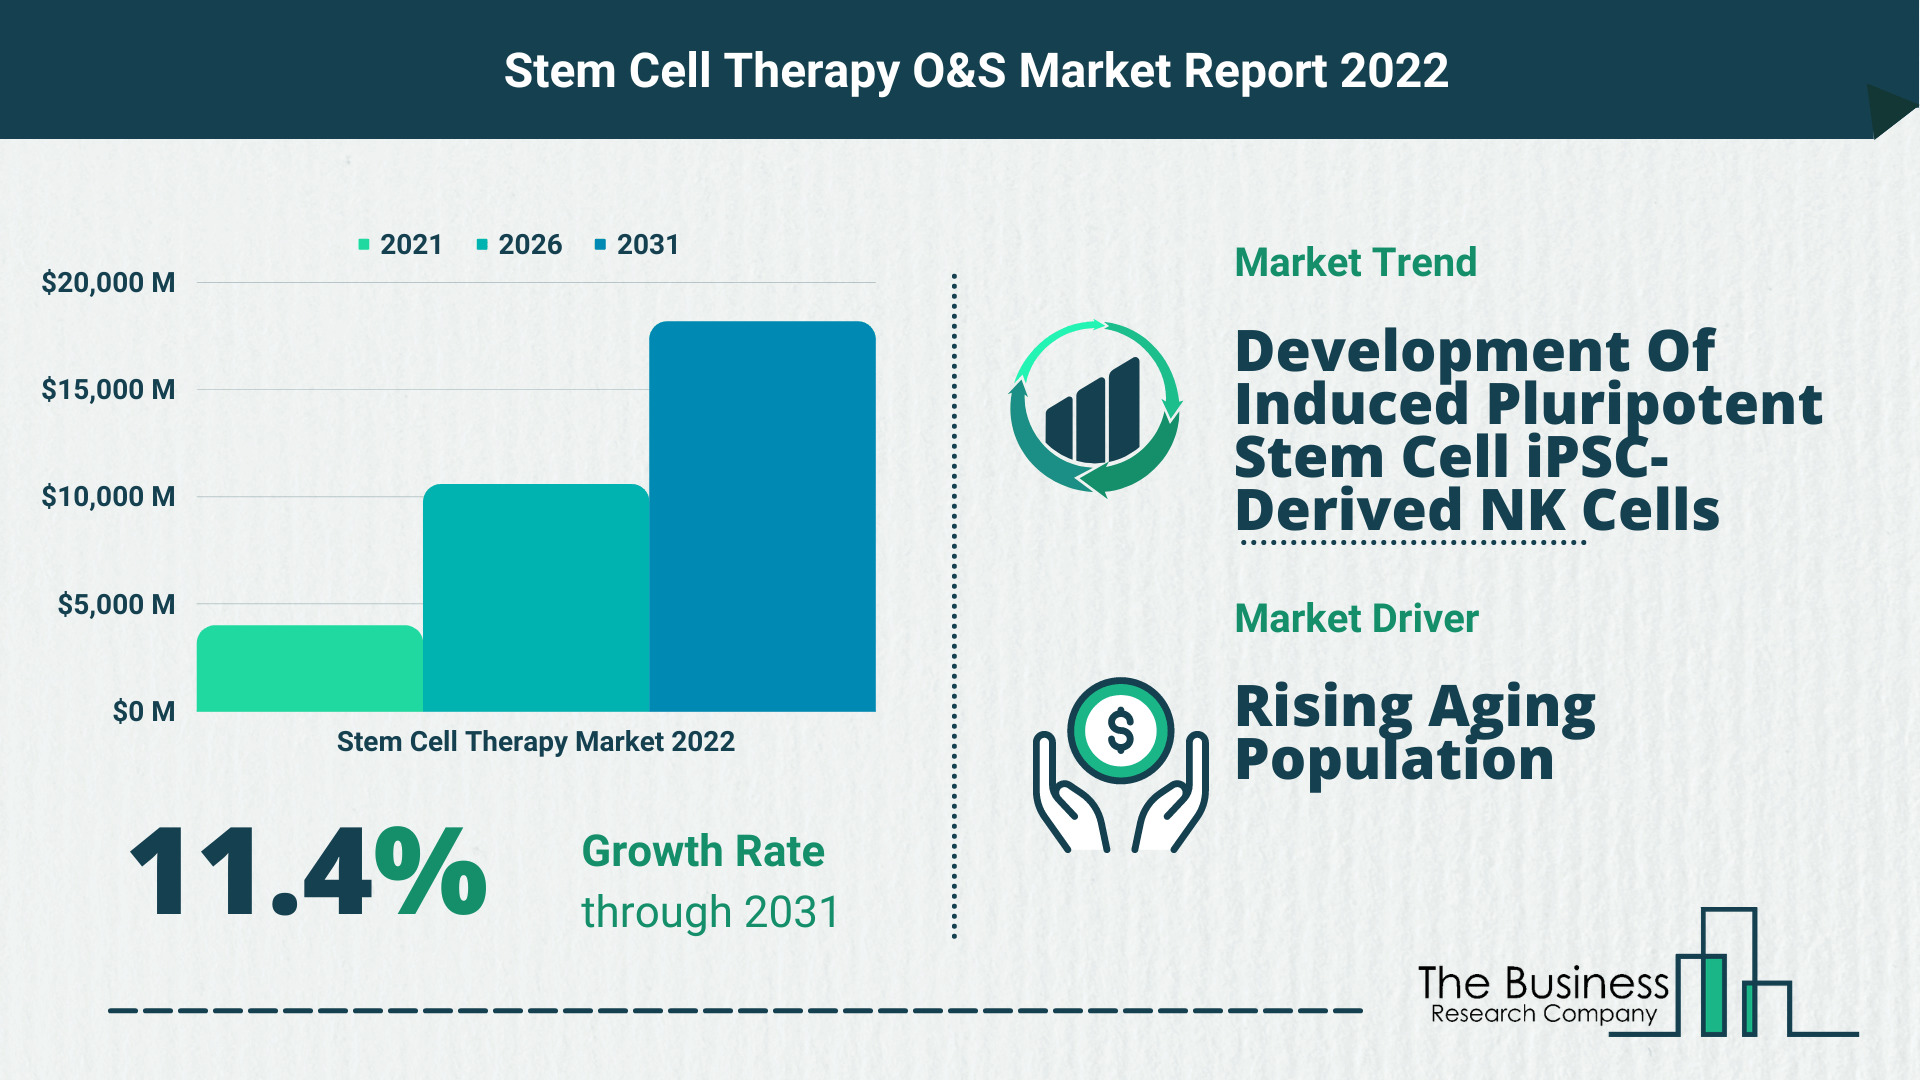 Key Opportunities And Strategies In The Stem Cell Therapy Market